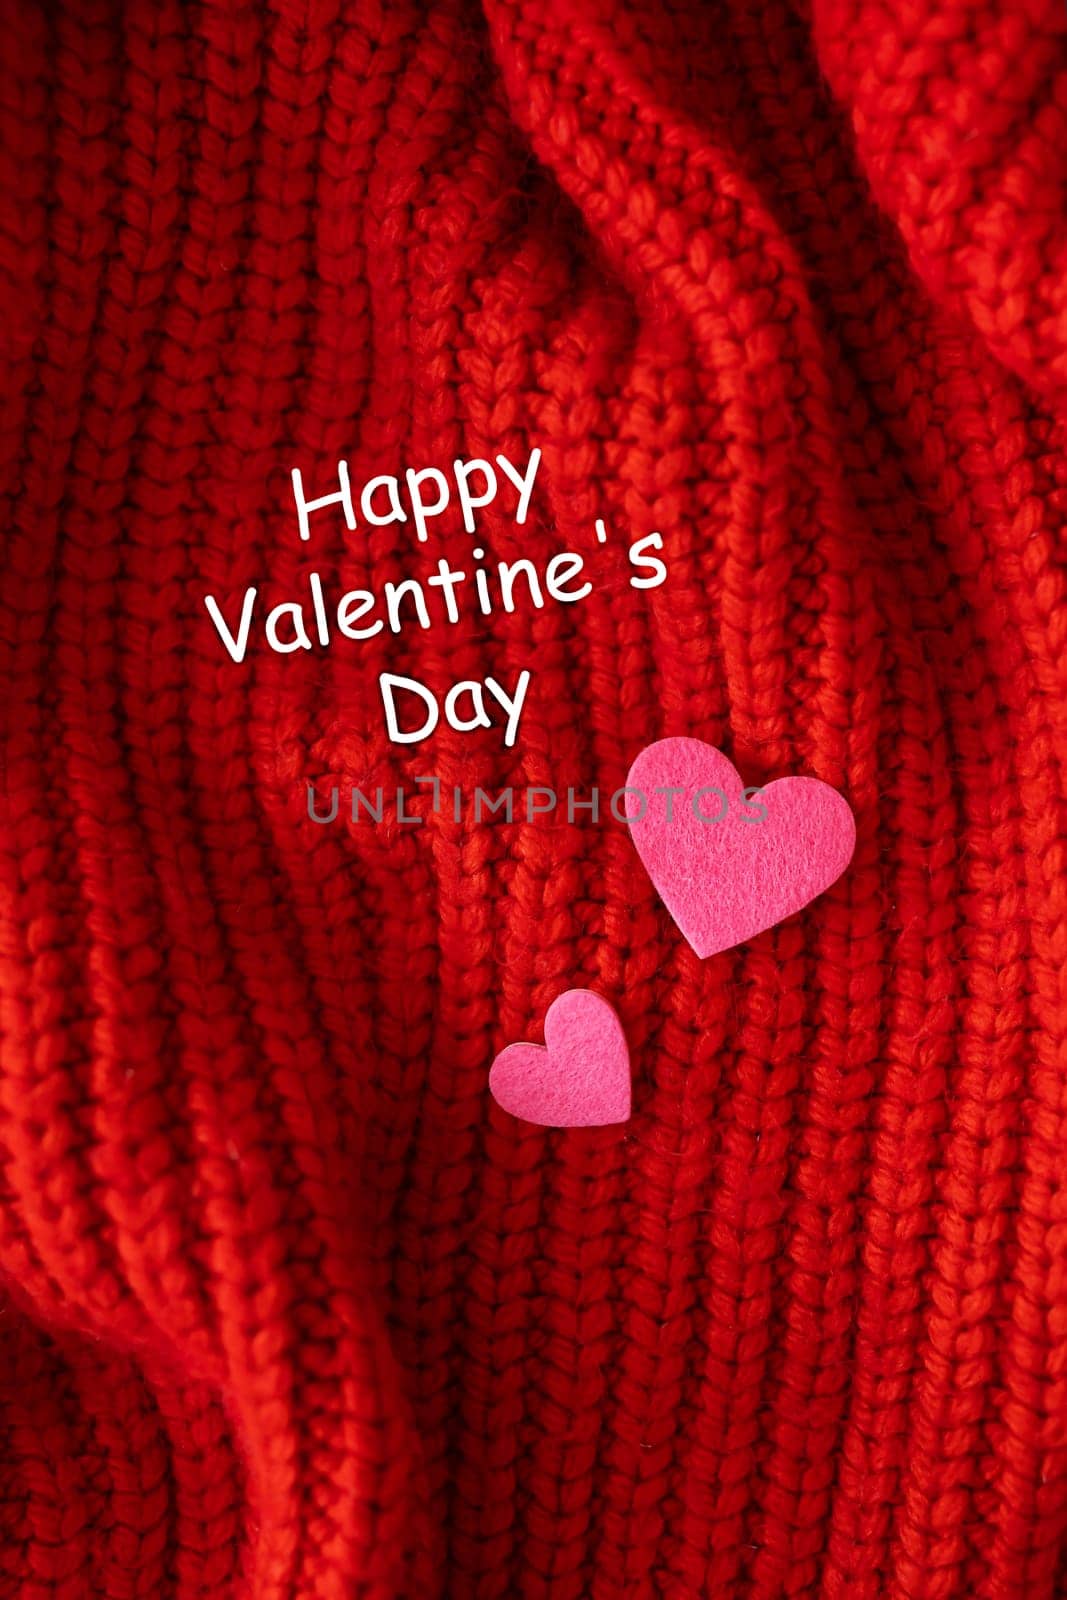 Decorative pink heart on a red knitted background, top view. Lettering Happy Valentine's Day